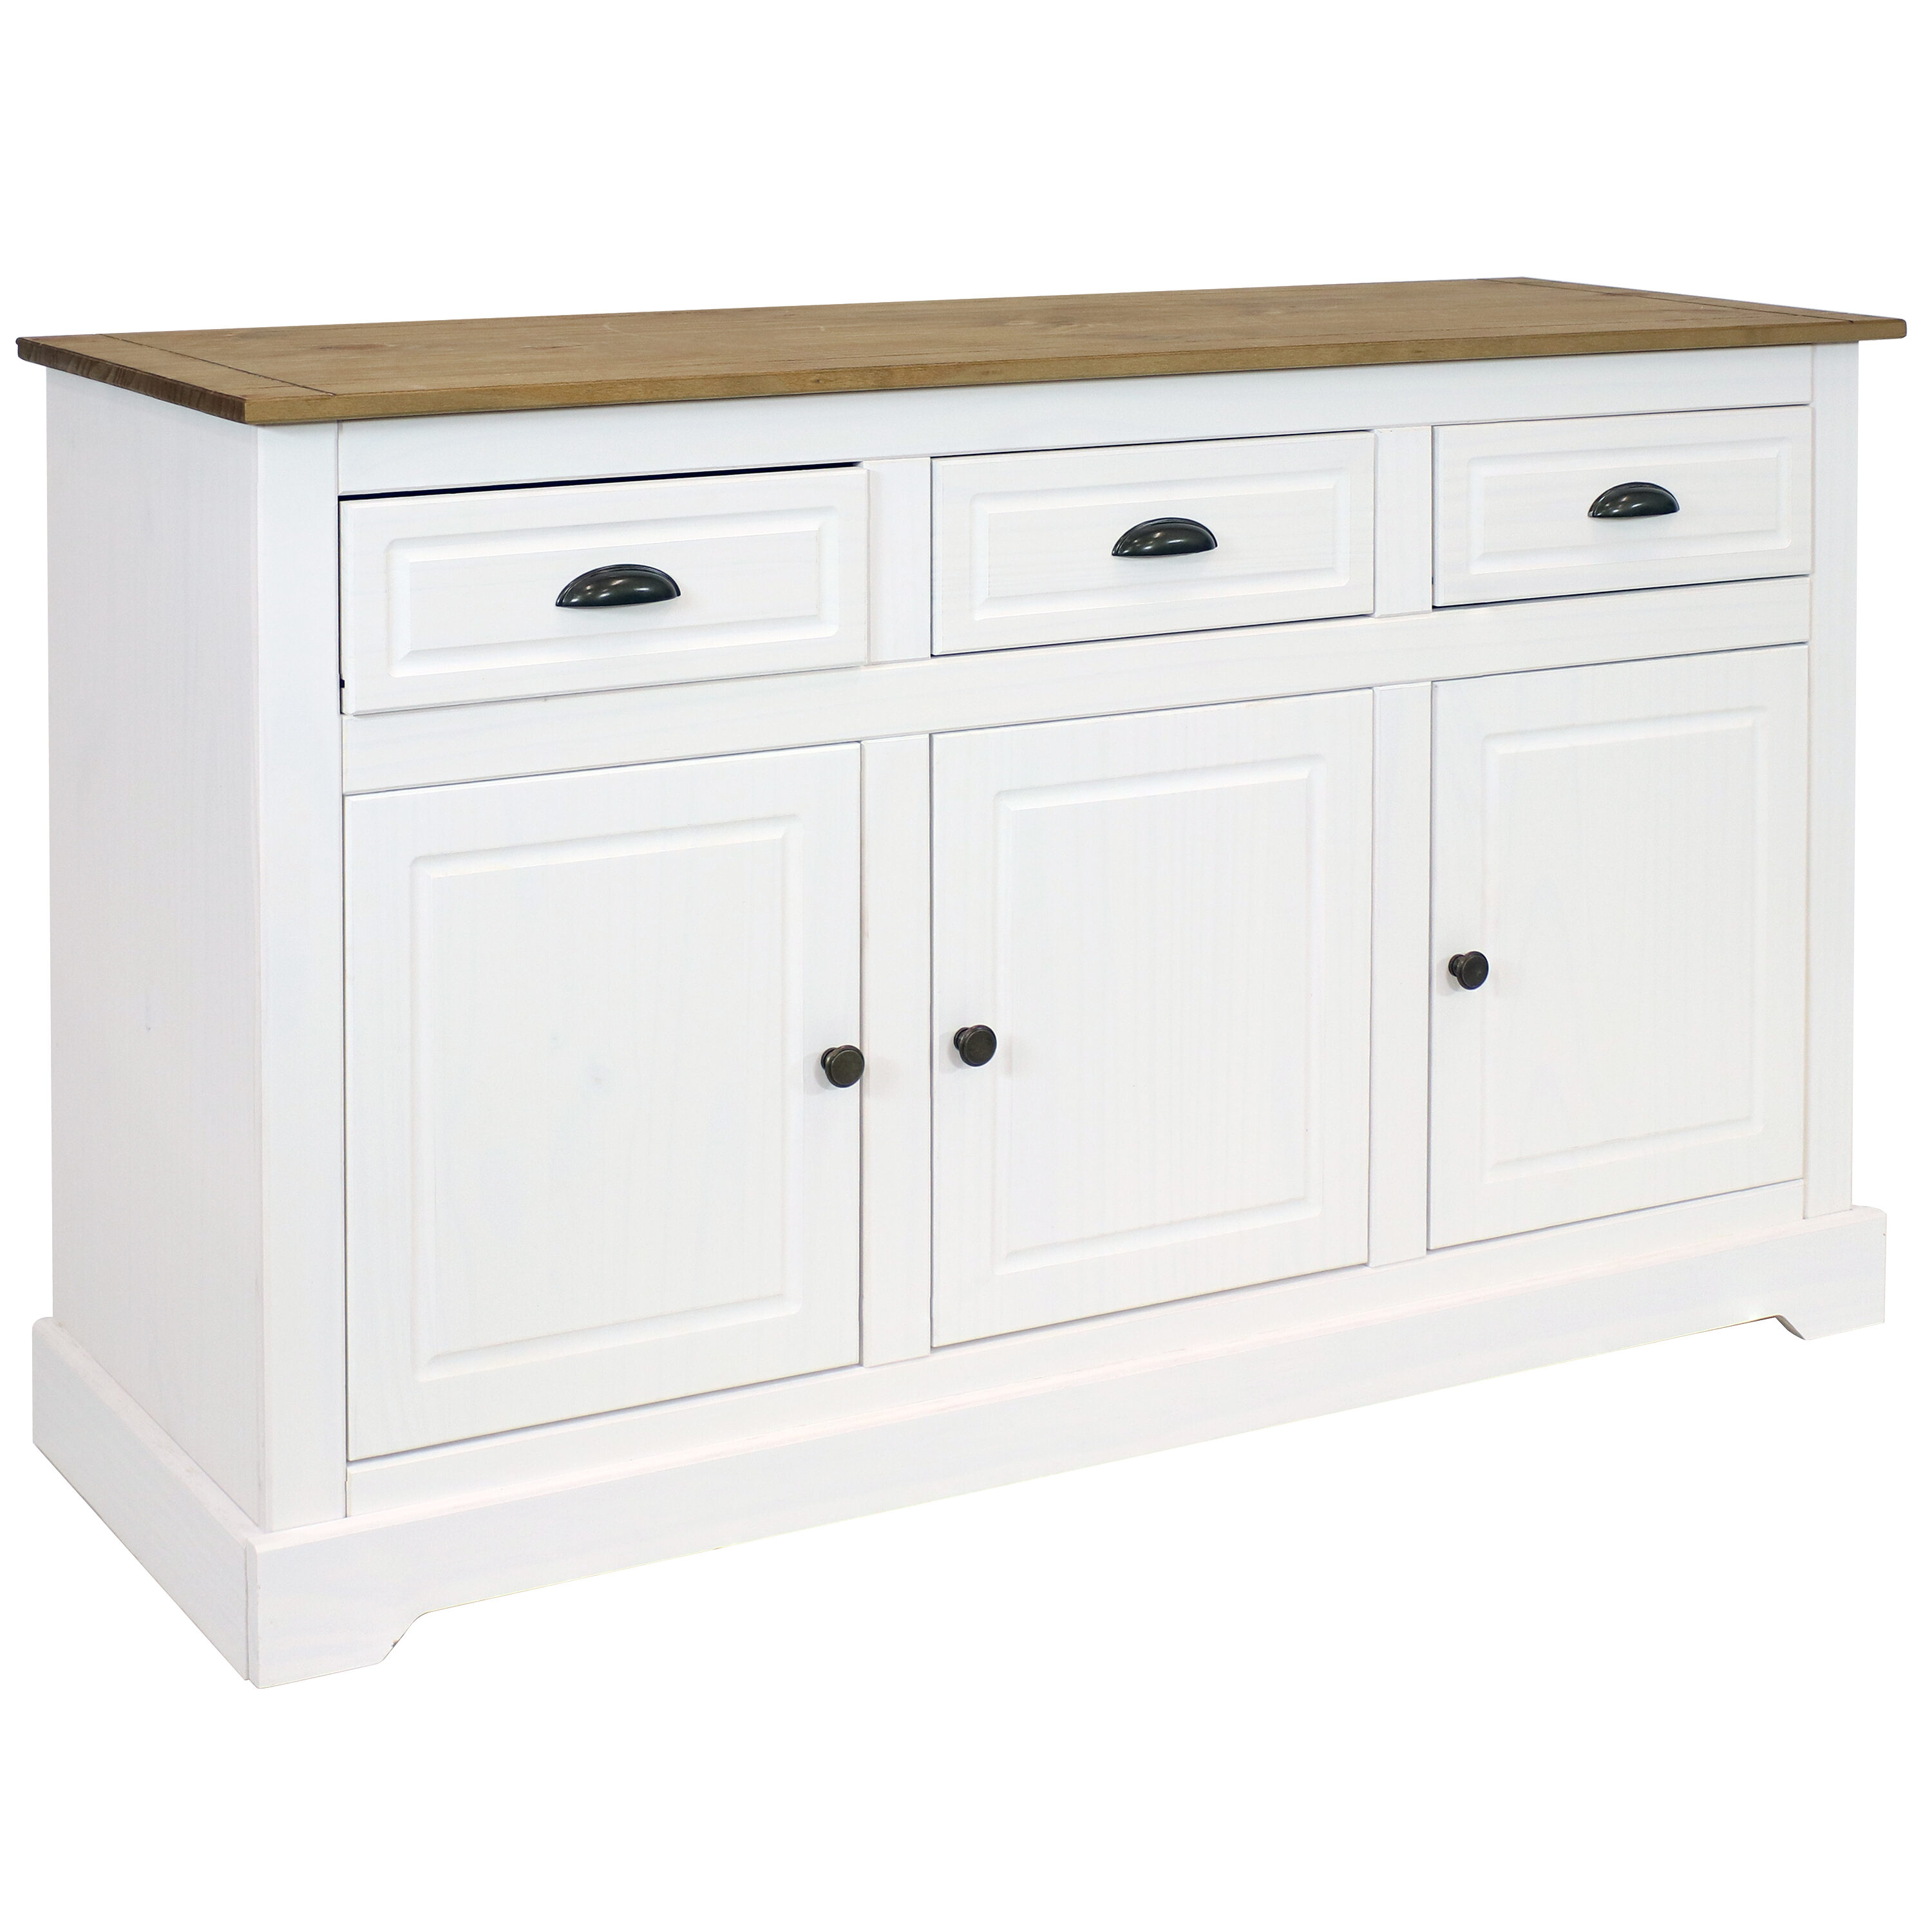 Sunnydaze Decor Contemporary/Modern White Wood Pine Sideboard in the ...